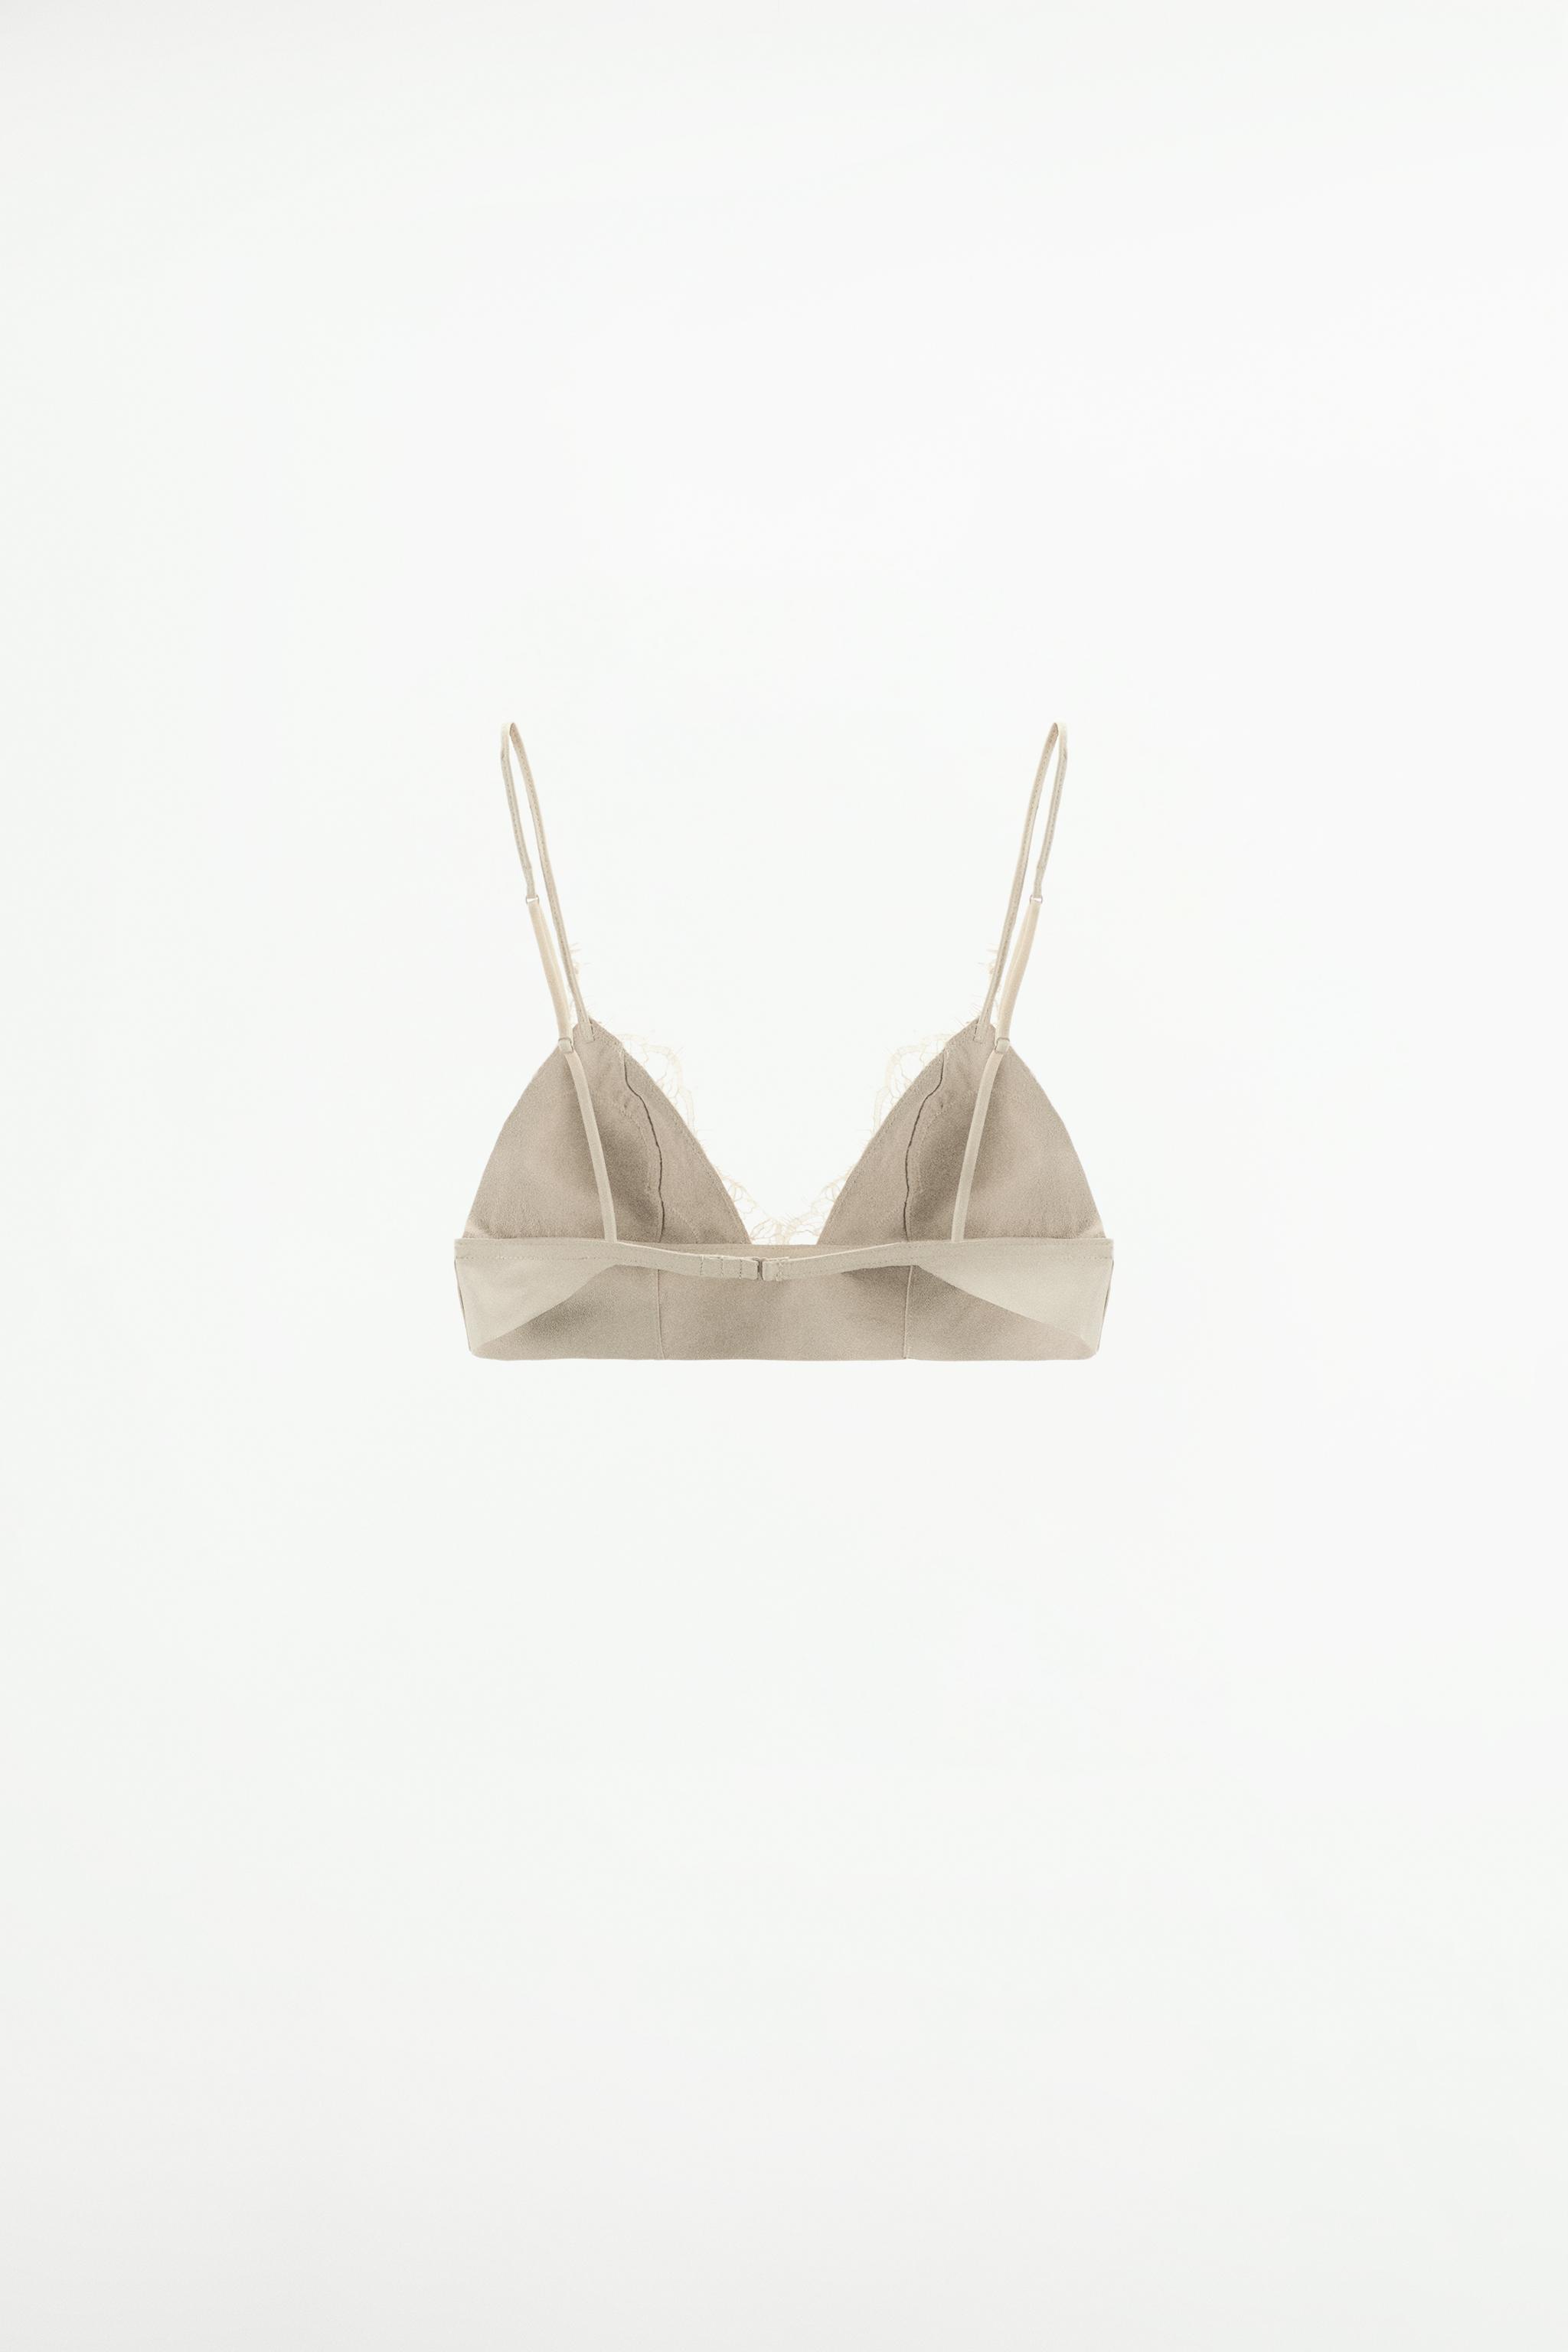 ZARA BNWT Lingerie Collection Bra with Lace Detail Size M Tan